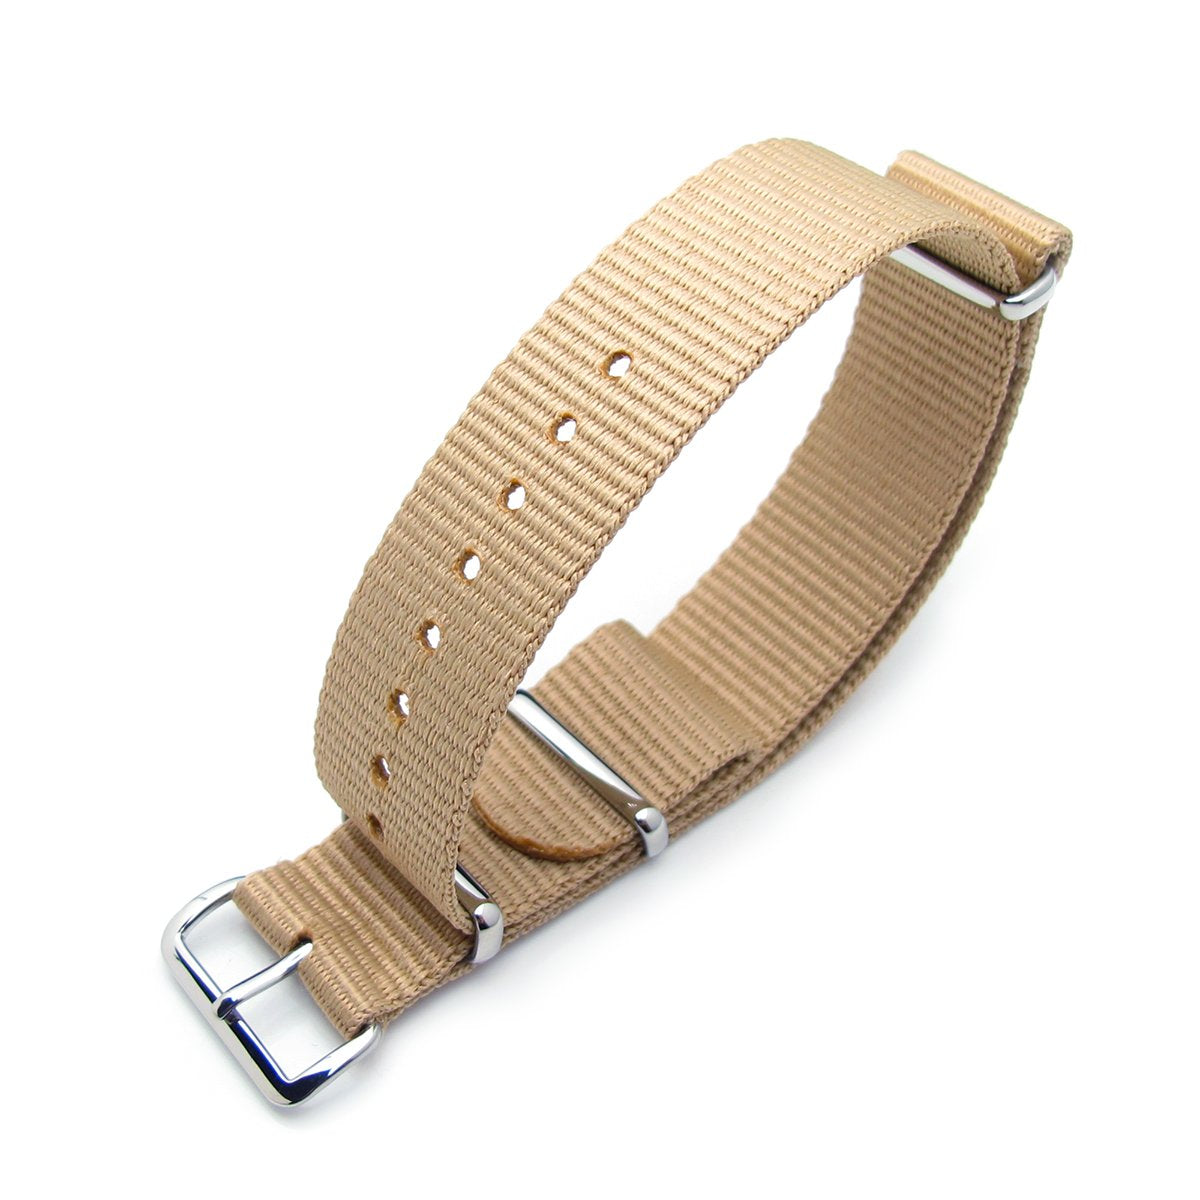 MiLTAT 20mm G10 military watch strap ballistic nylon armband Polished Sand Strapcode Watch Bands